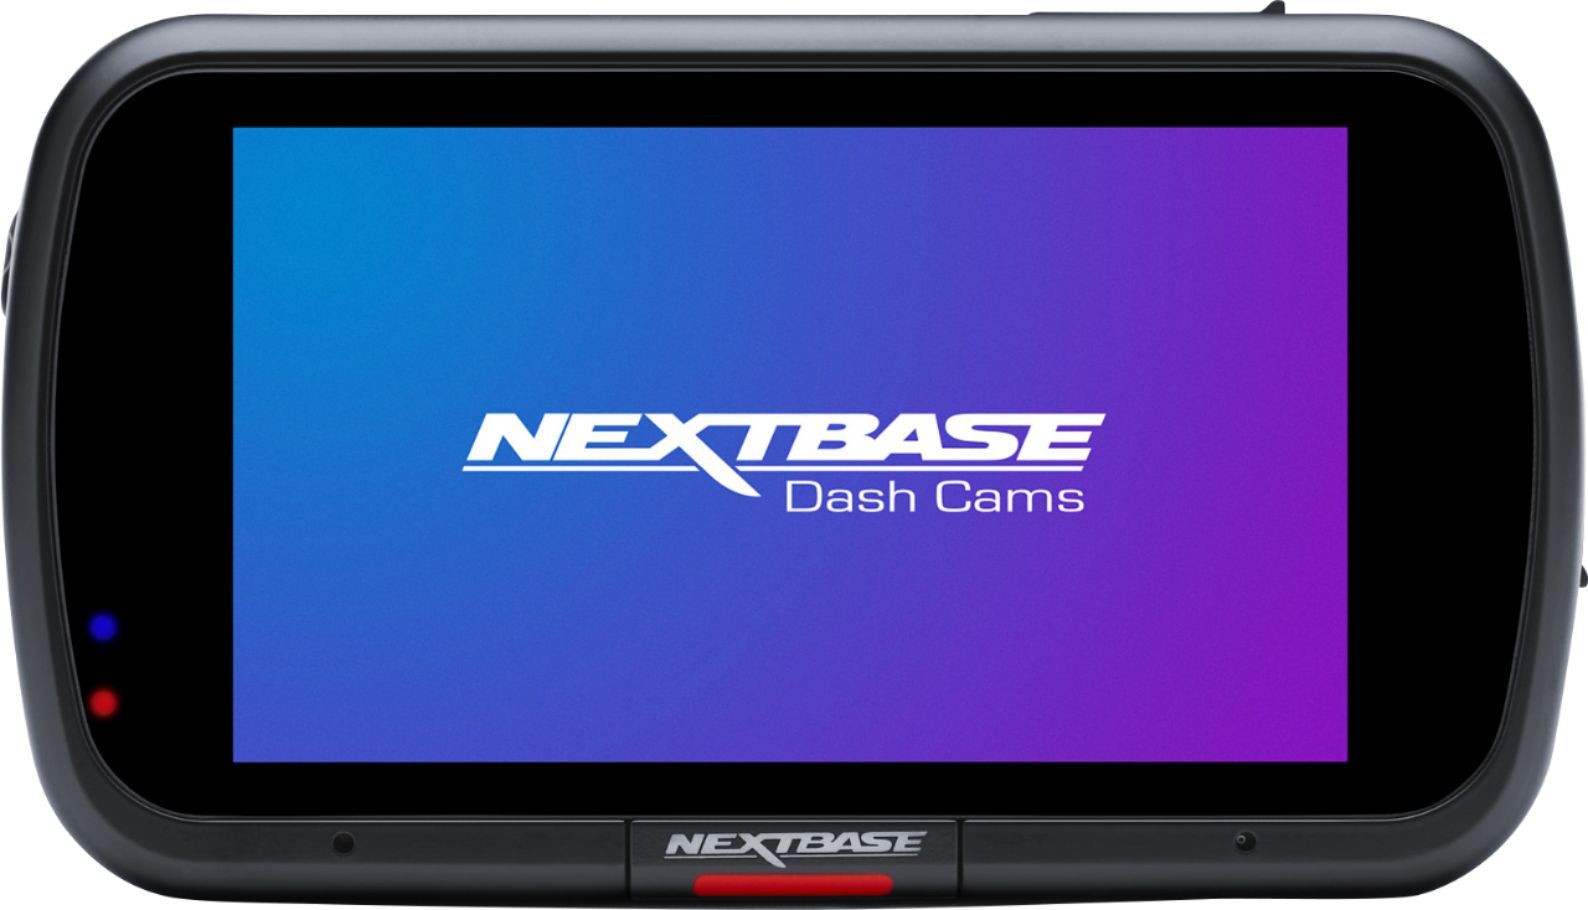  Nextbase 622GW + Front and Rear Camera + Hardwire Kit :  Electronics